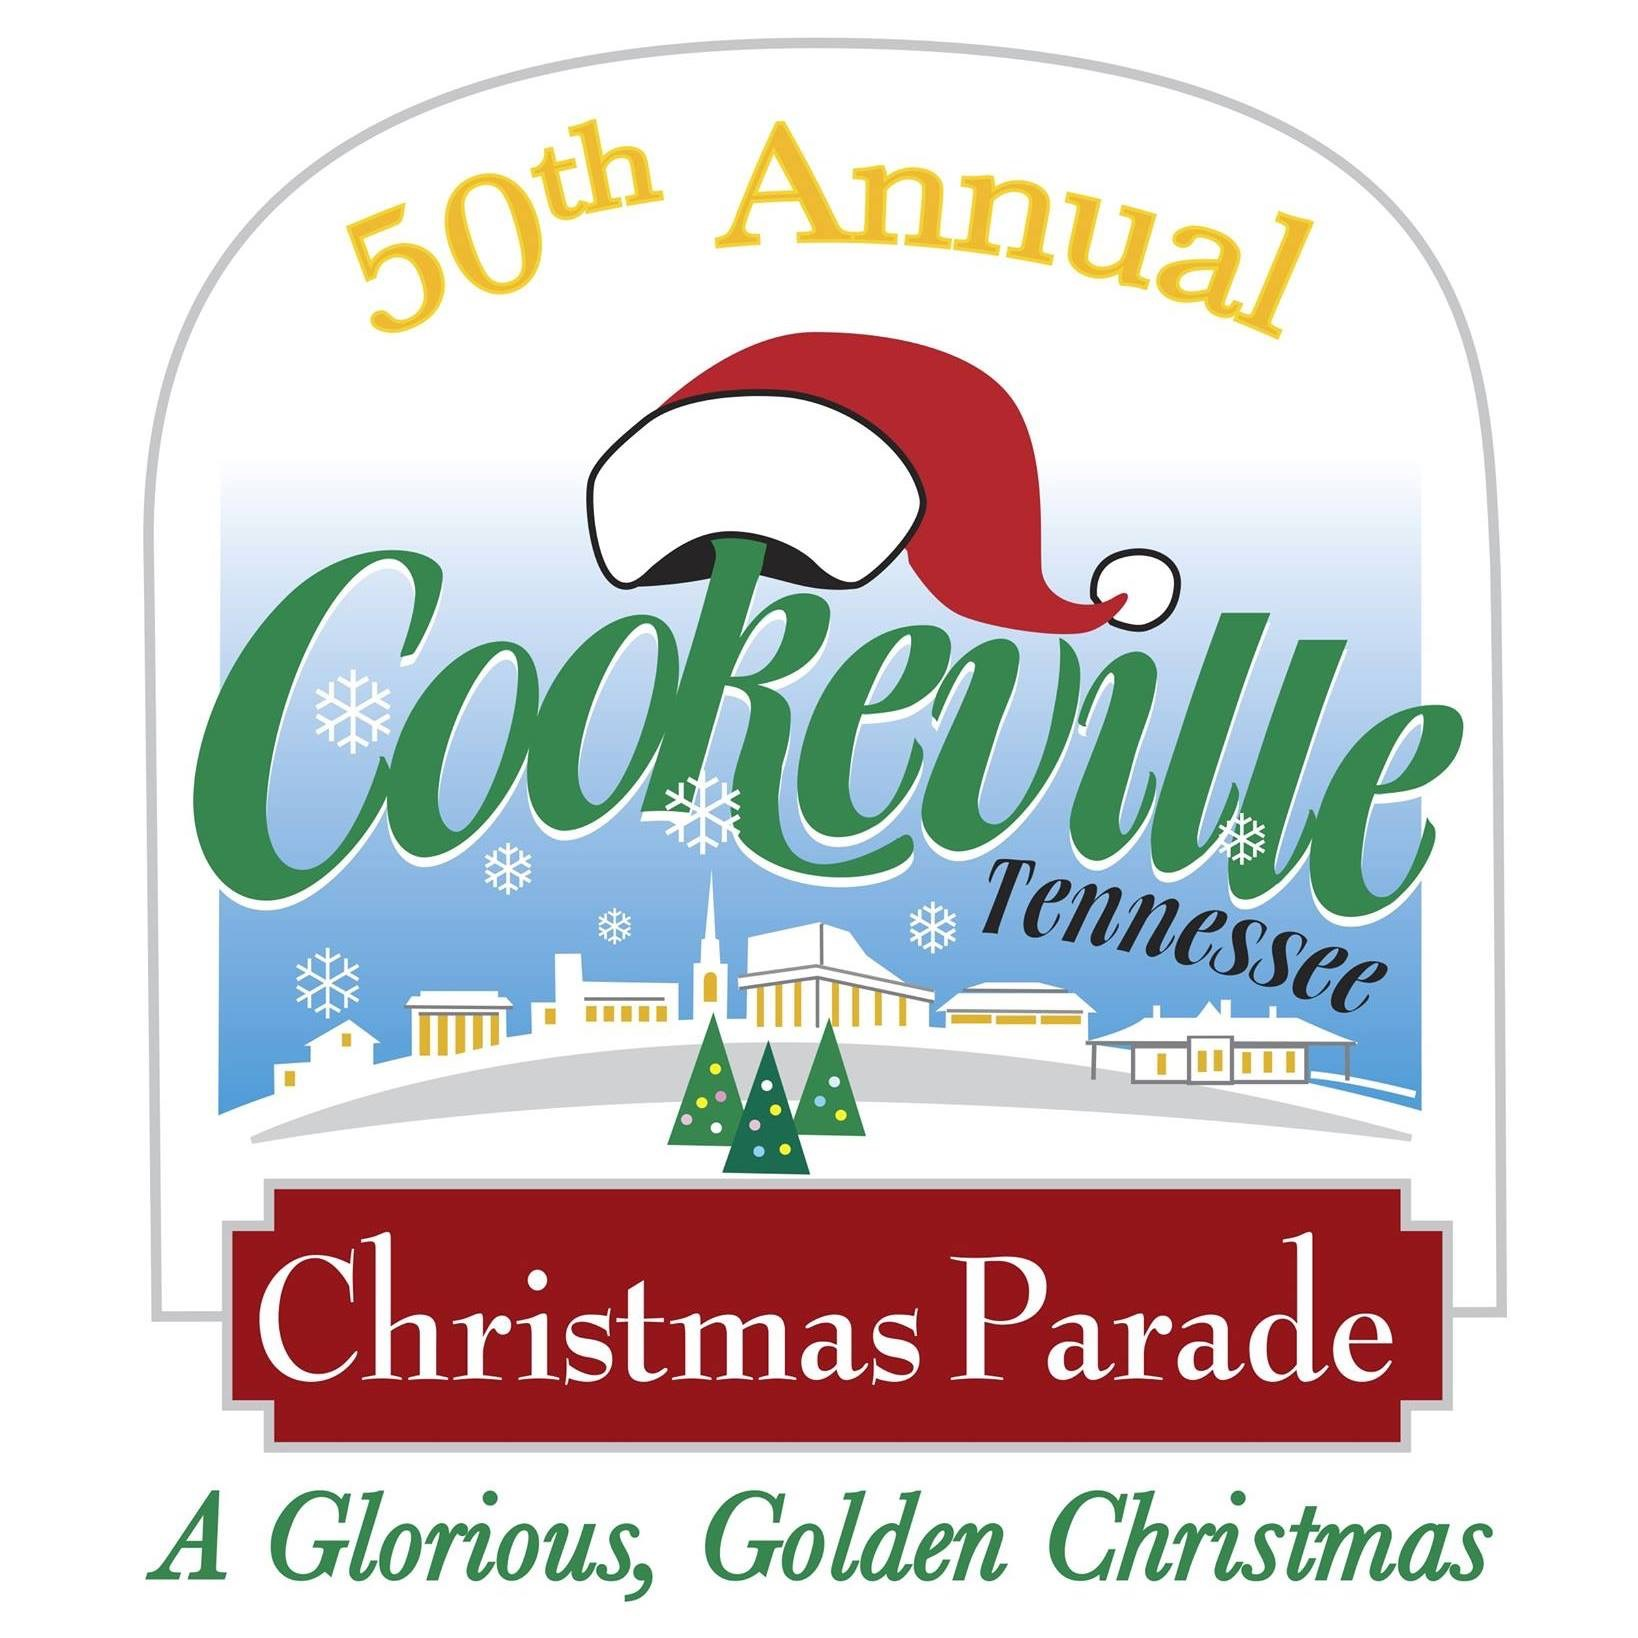 51st Annual Cookeville Christmas Parade